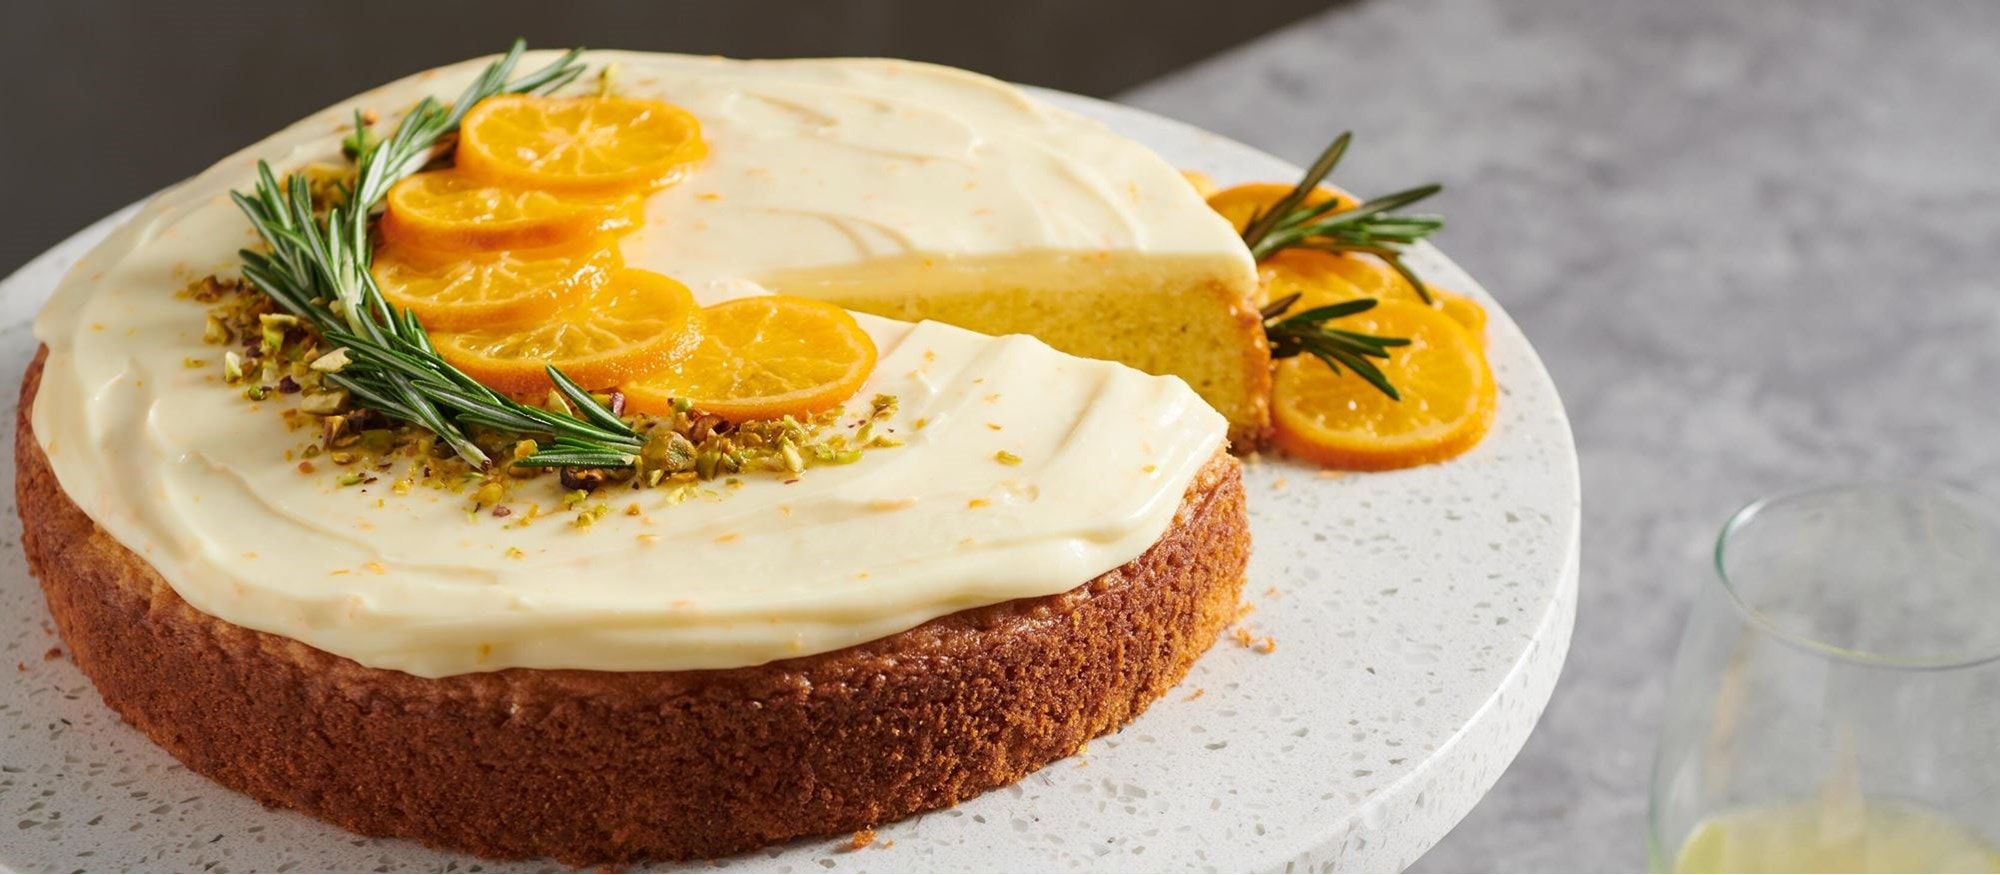 Easy and delicious Clementine Olive Oil Cake  recipe using the Gourmet mode setting of your Wolf Oven